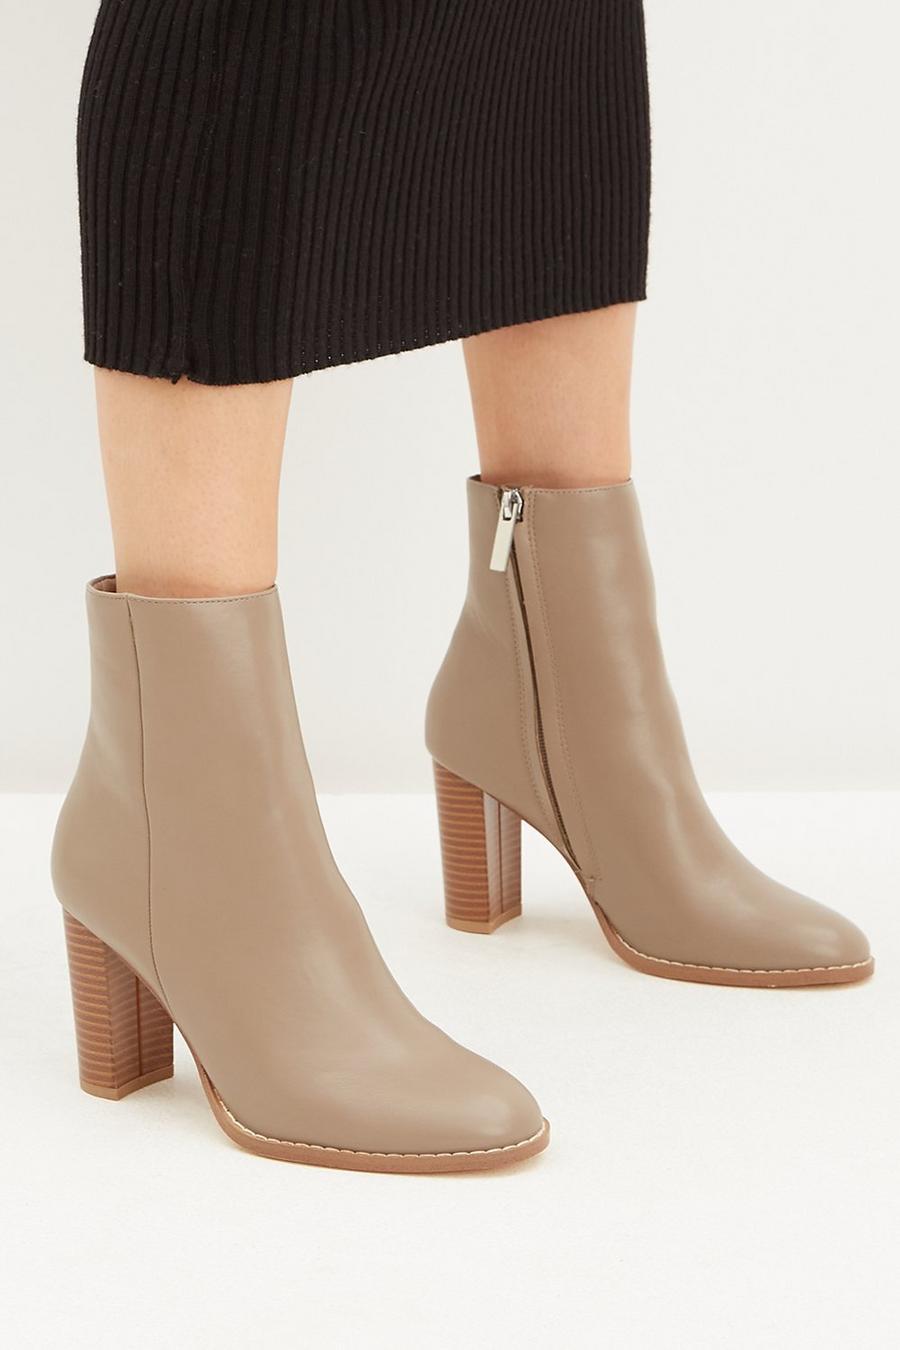 Amalie Stack Heeled Ankle Boot